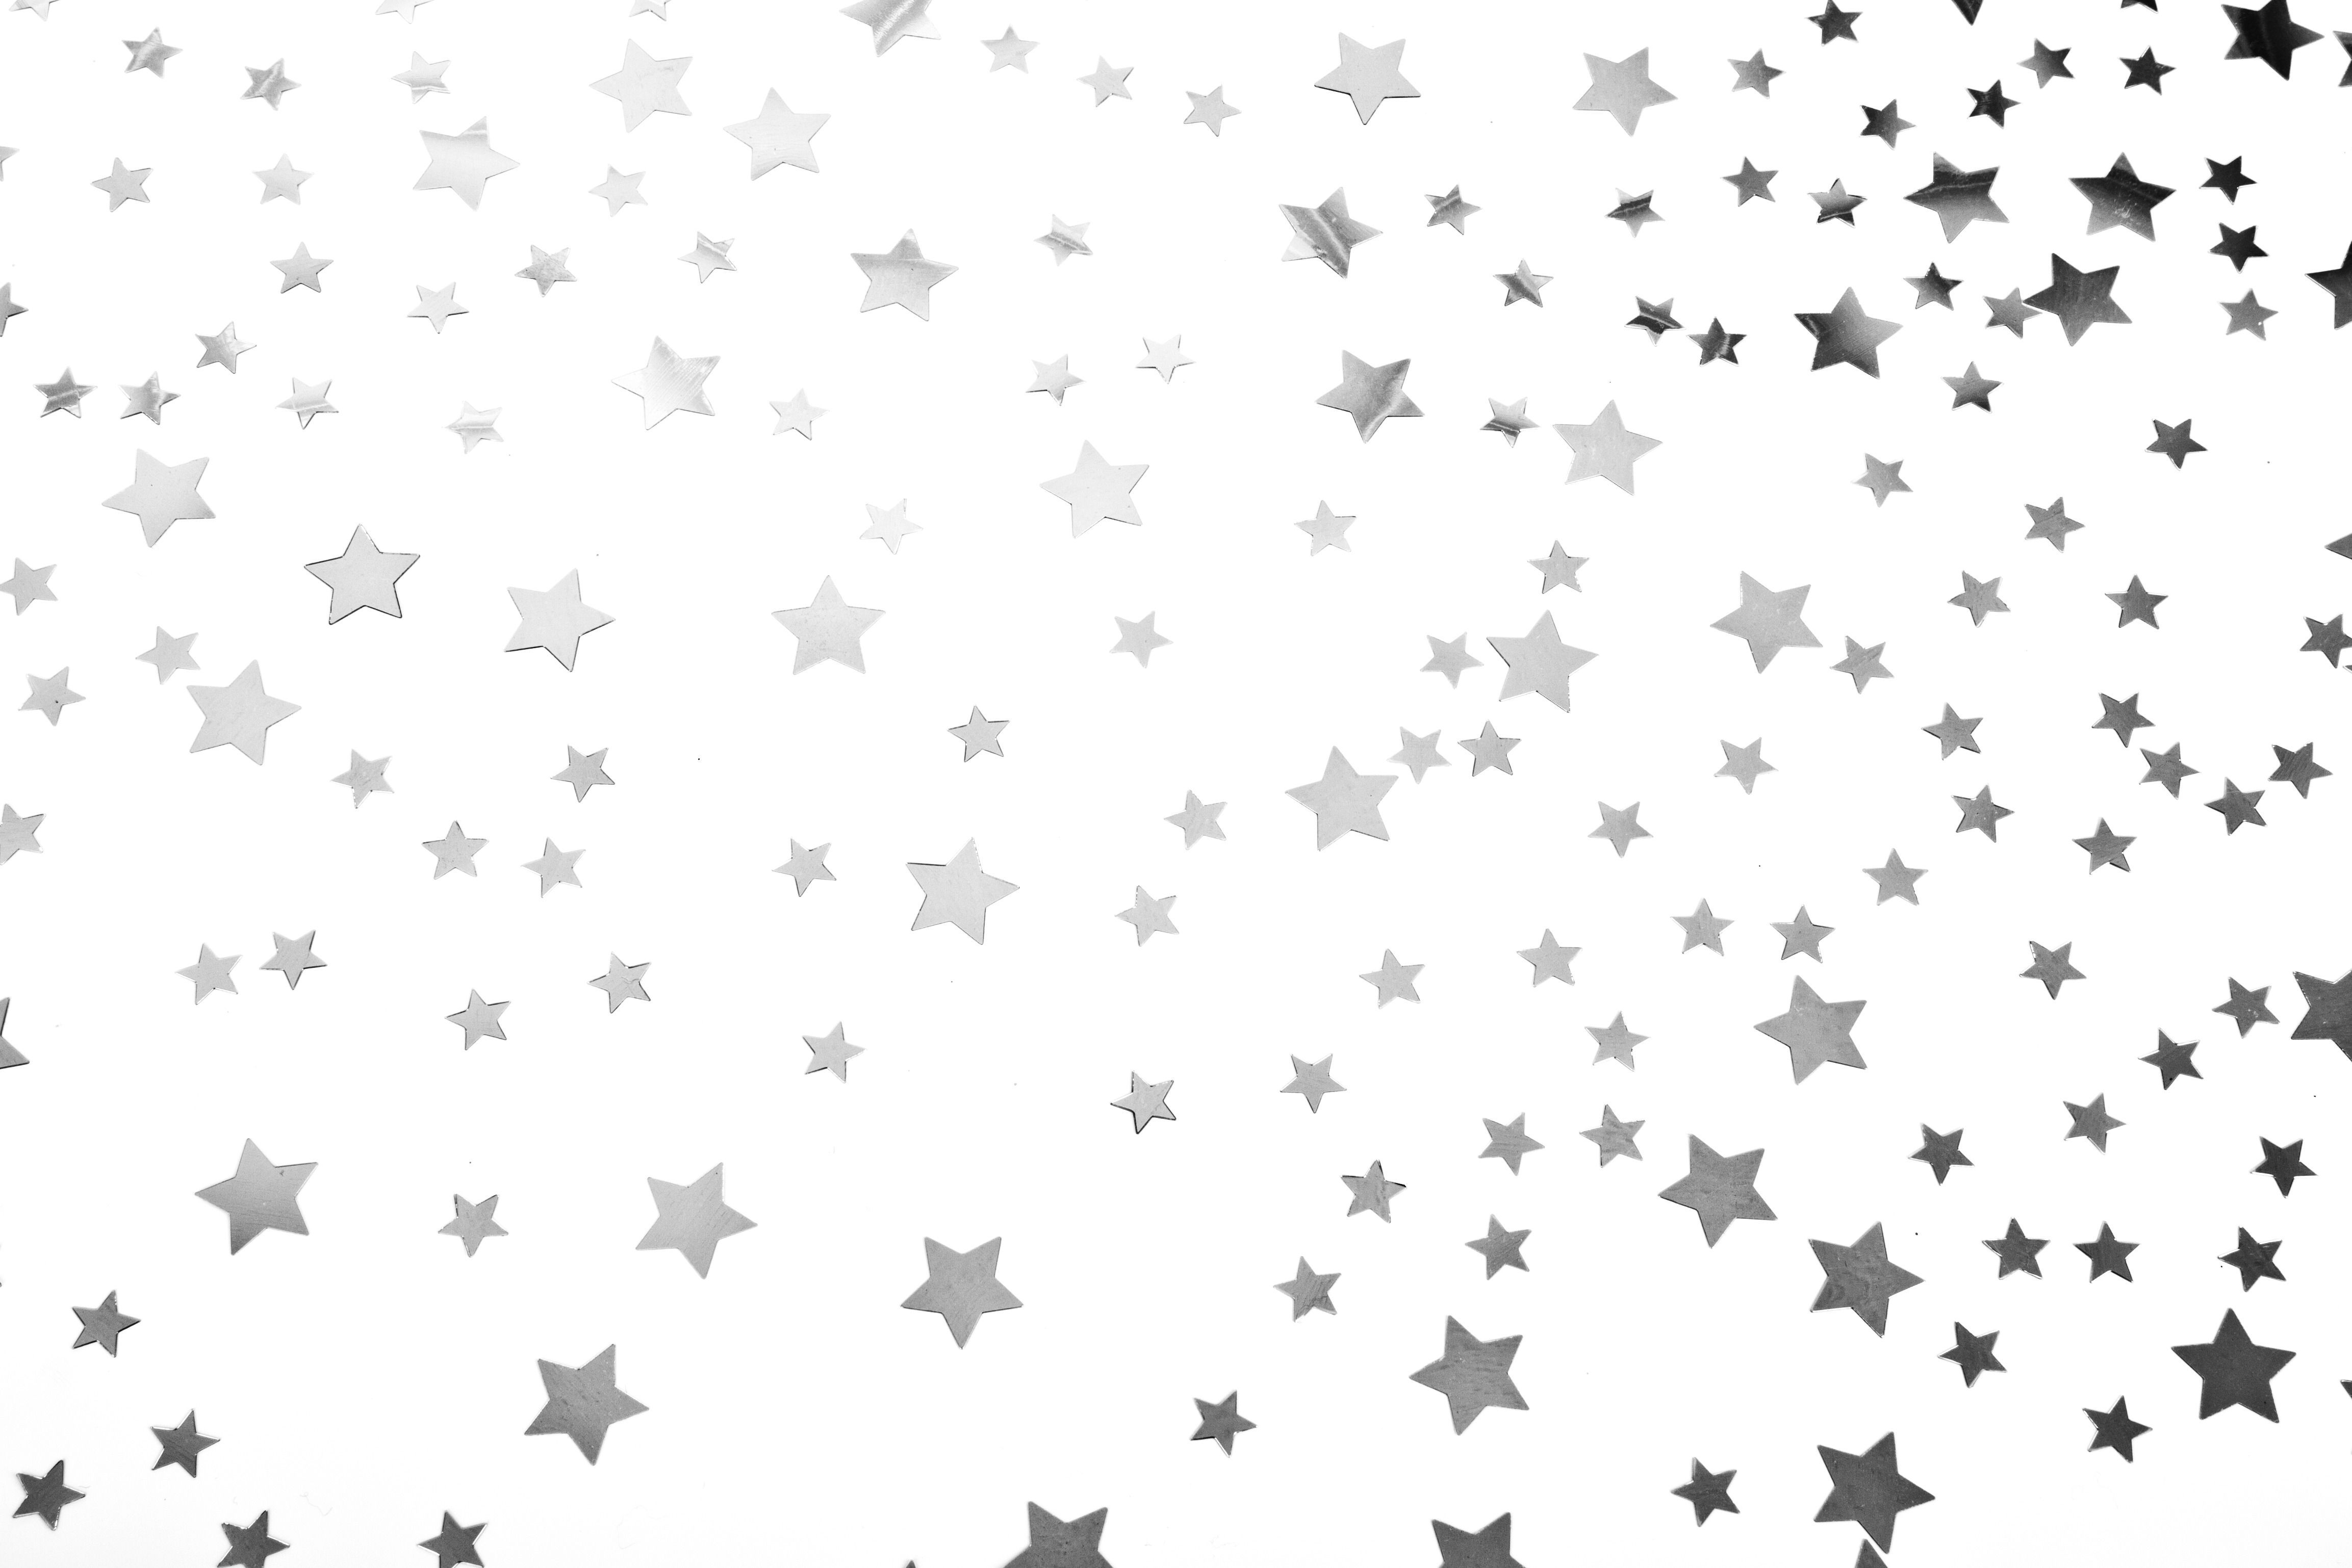 35 Stars at Xmas Background Images, Cards or Christmas Wallpapers ...